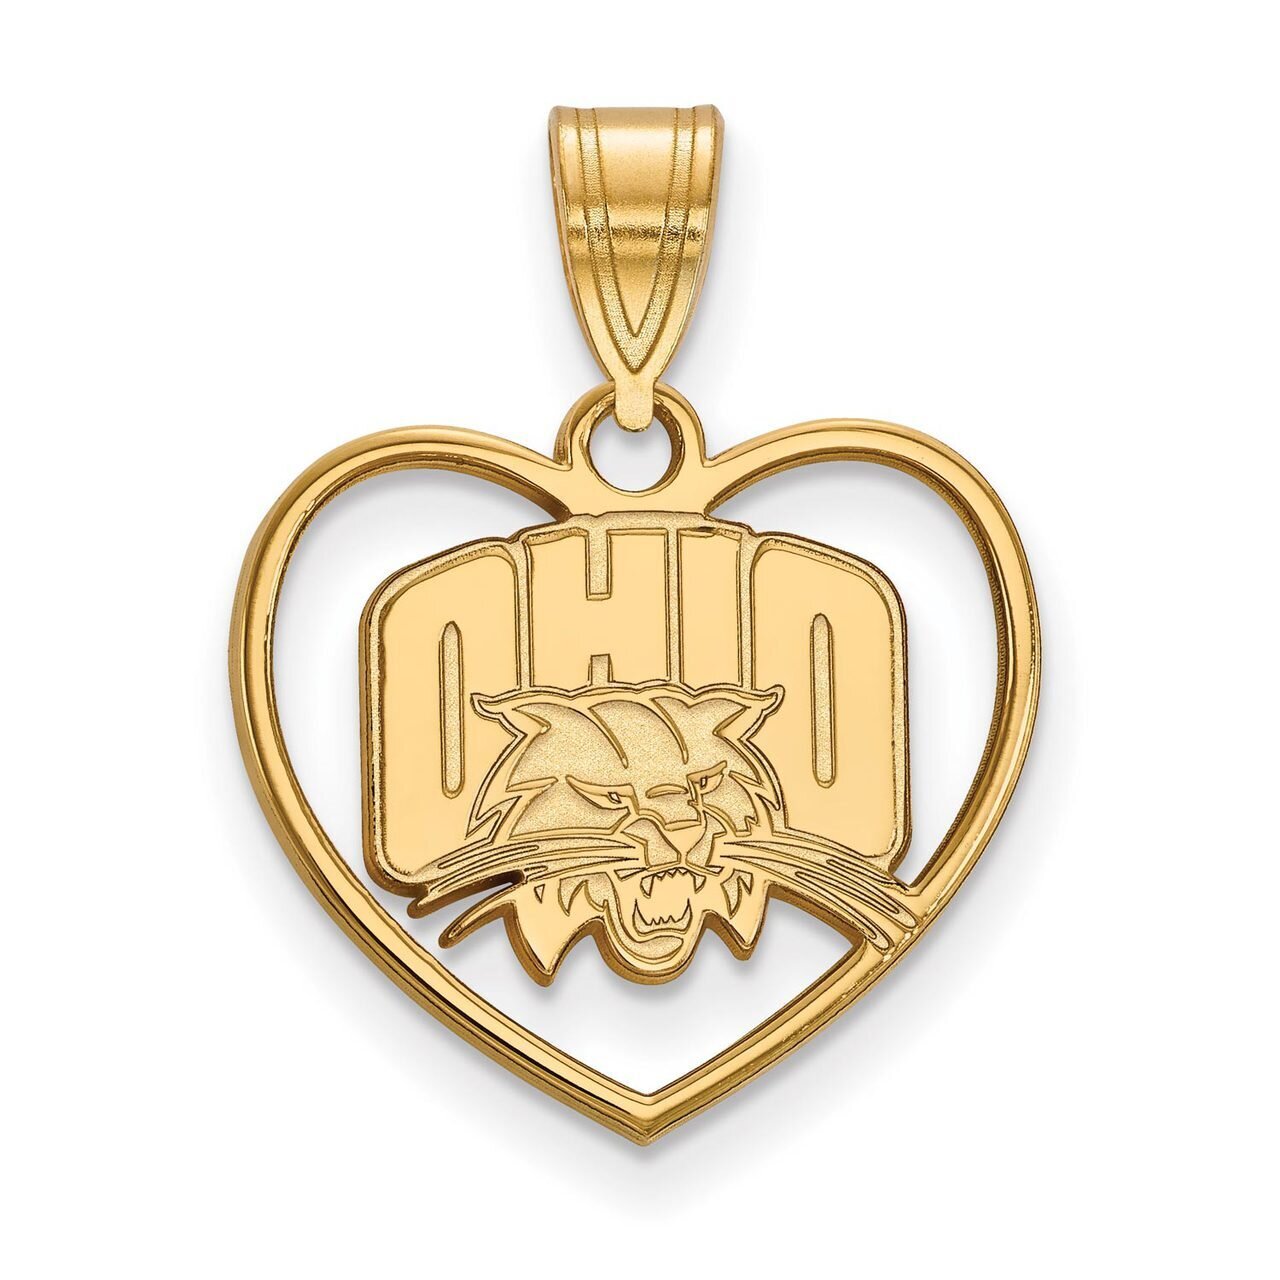 Ohio University Pendant in Heart Gold-plated Silver GP013OU